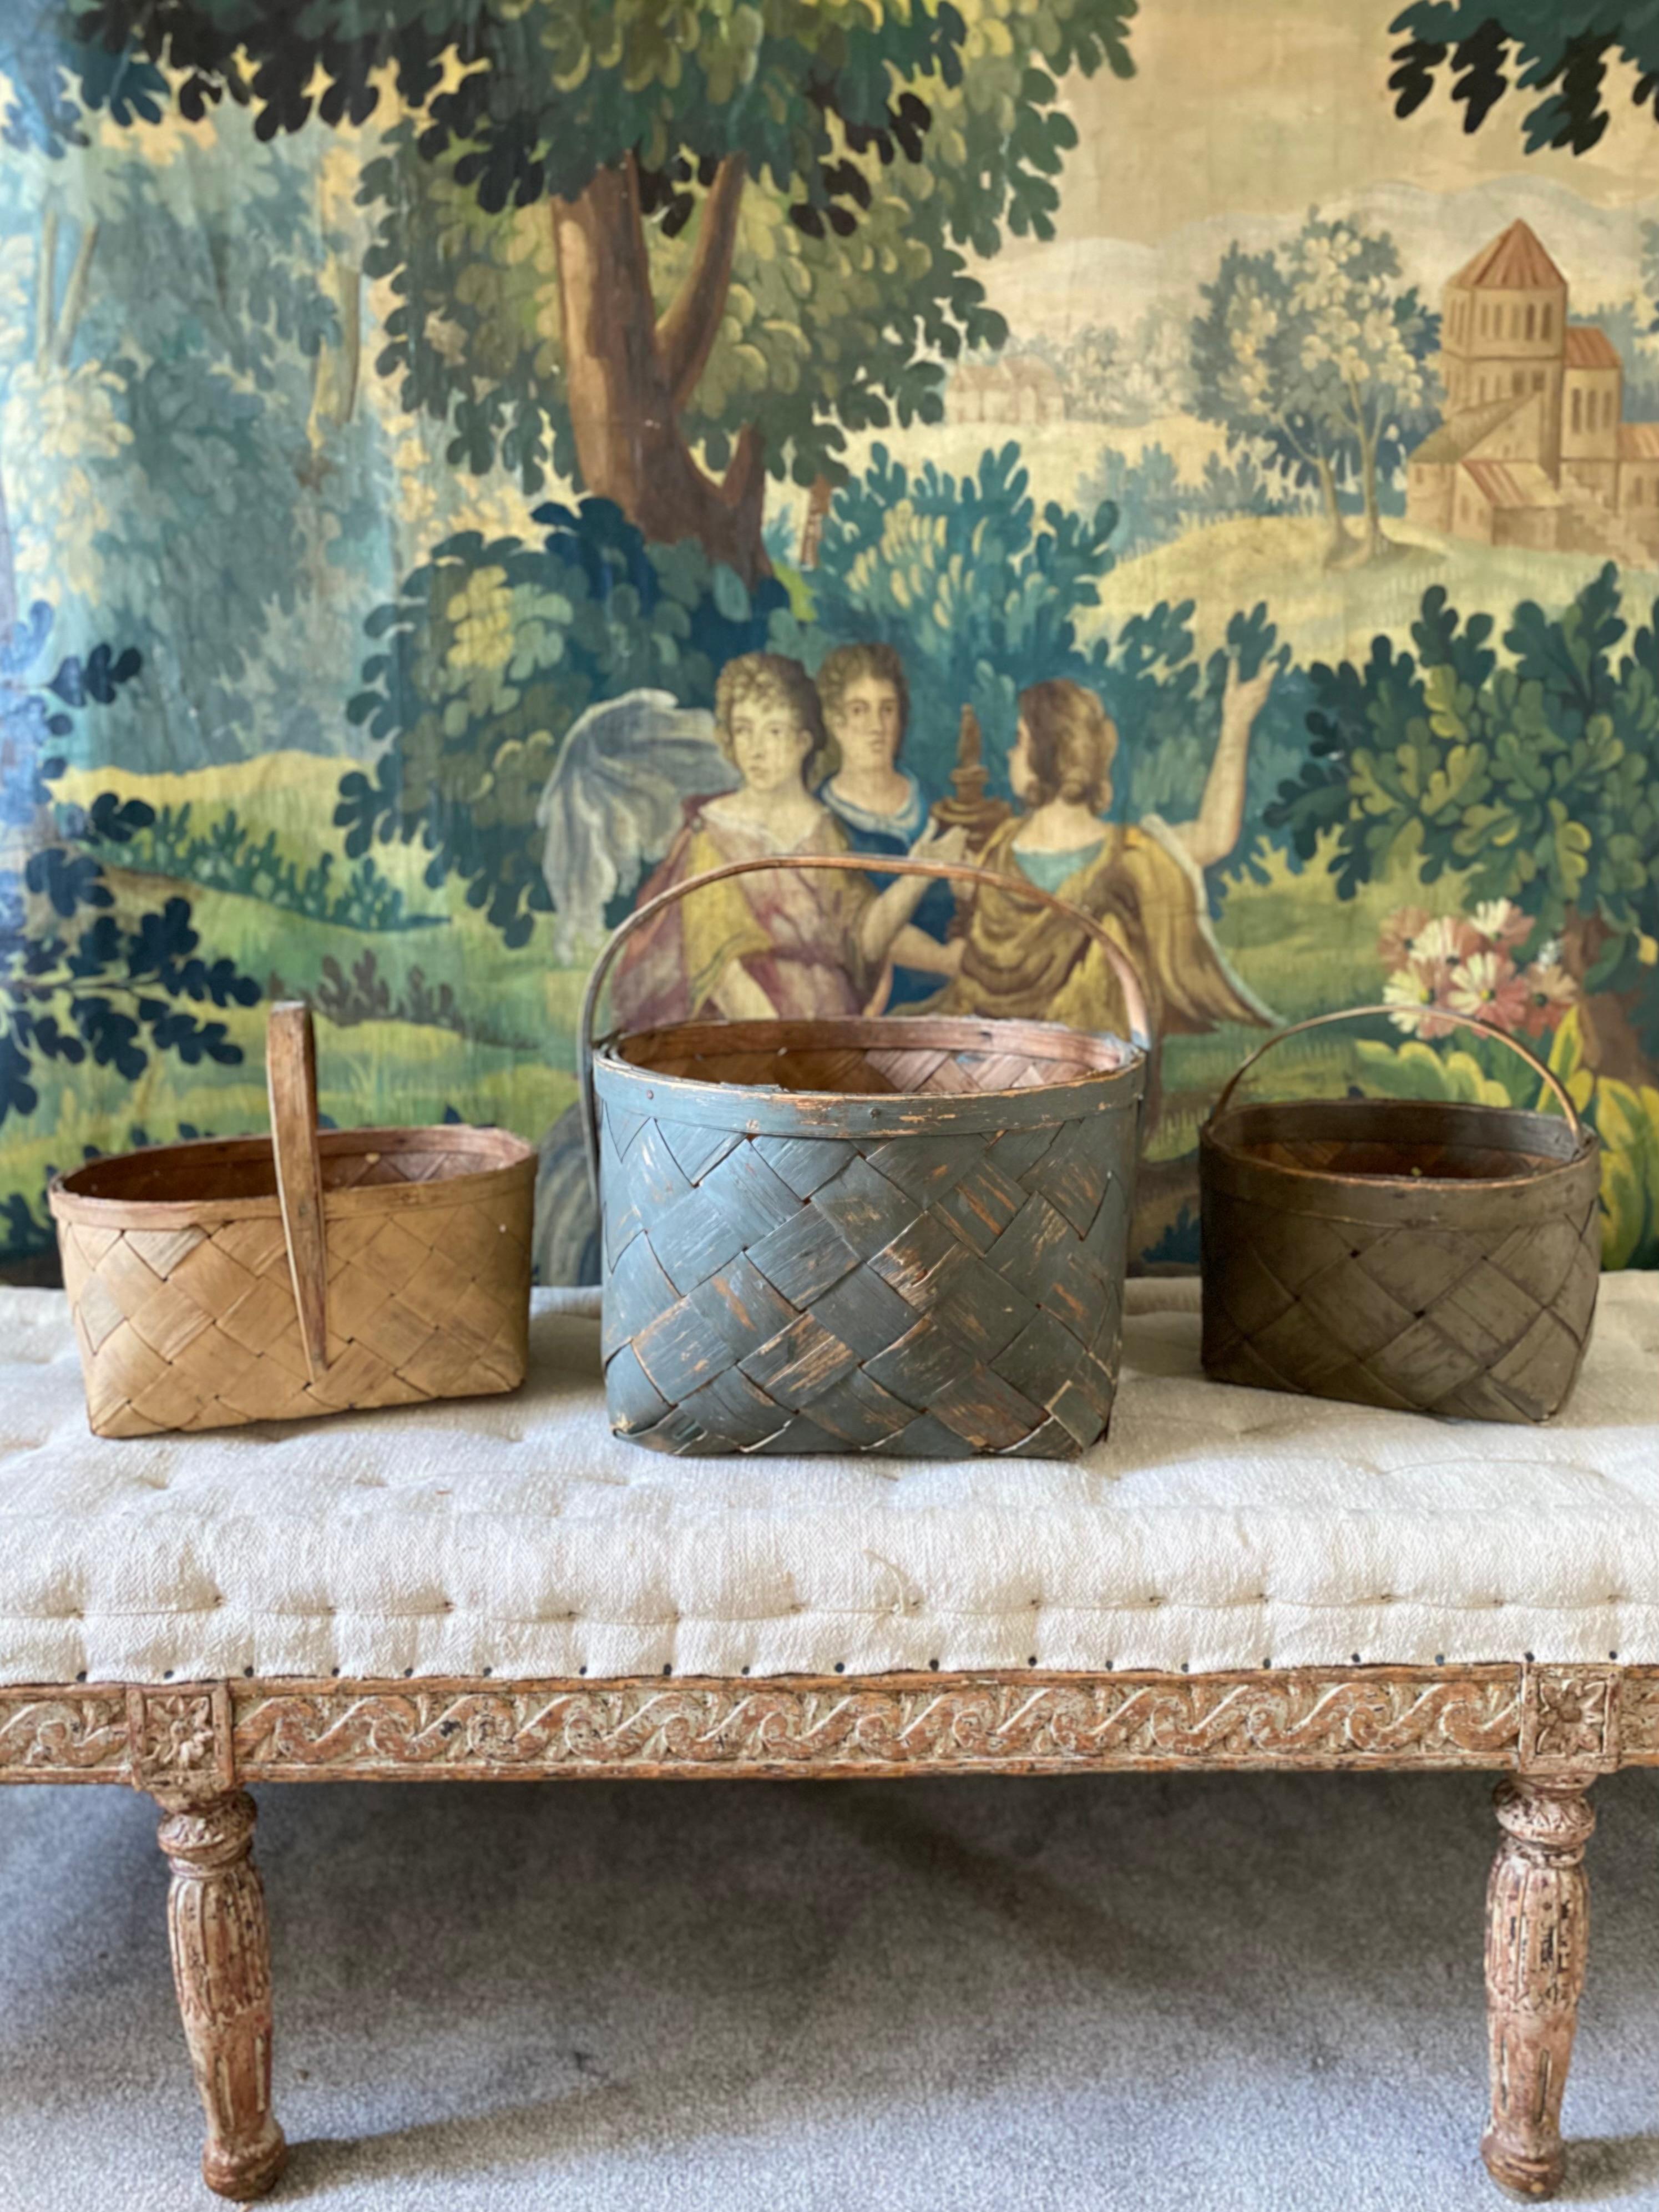 A set of three late 19th century Swedish woven birch baskets all in original paint and offered in good condition - the largest is a round mid teal blue and measures 15” across and 16” high including handle - the two smaller ones are an oval maize